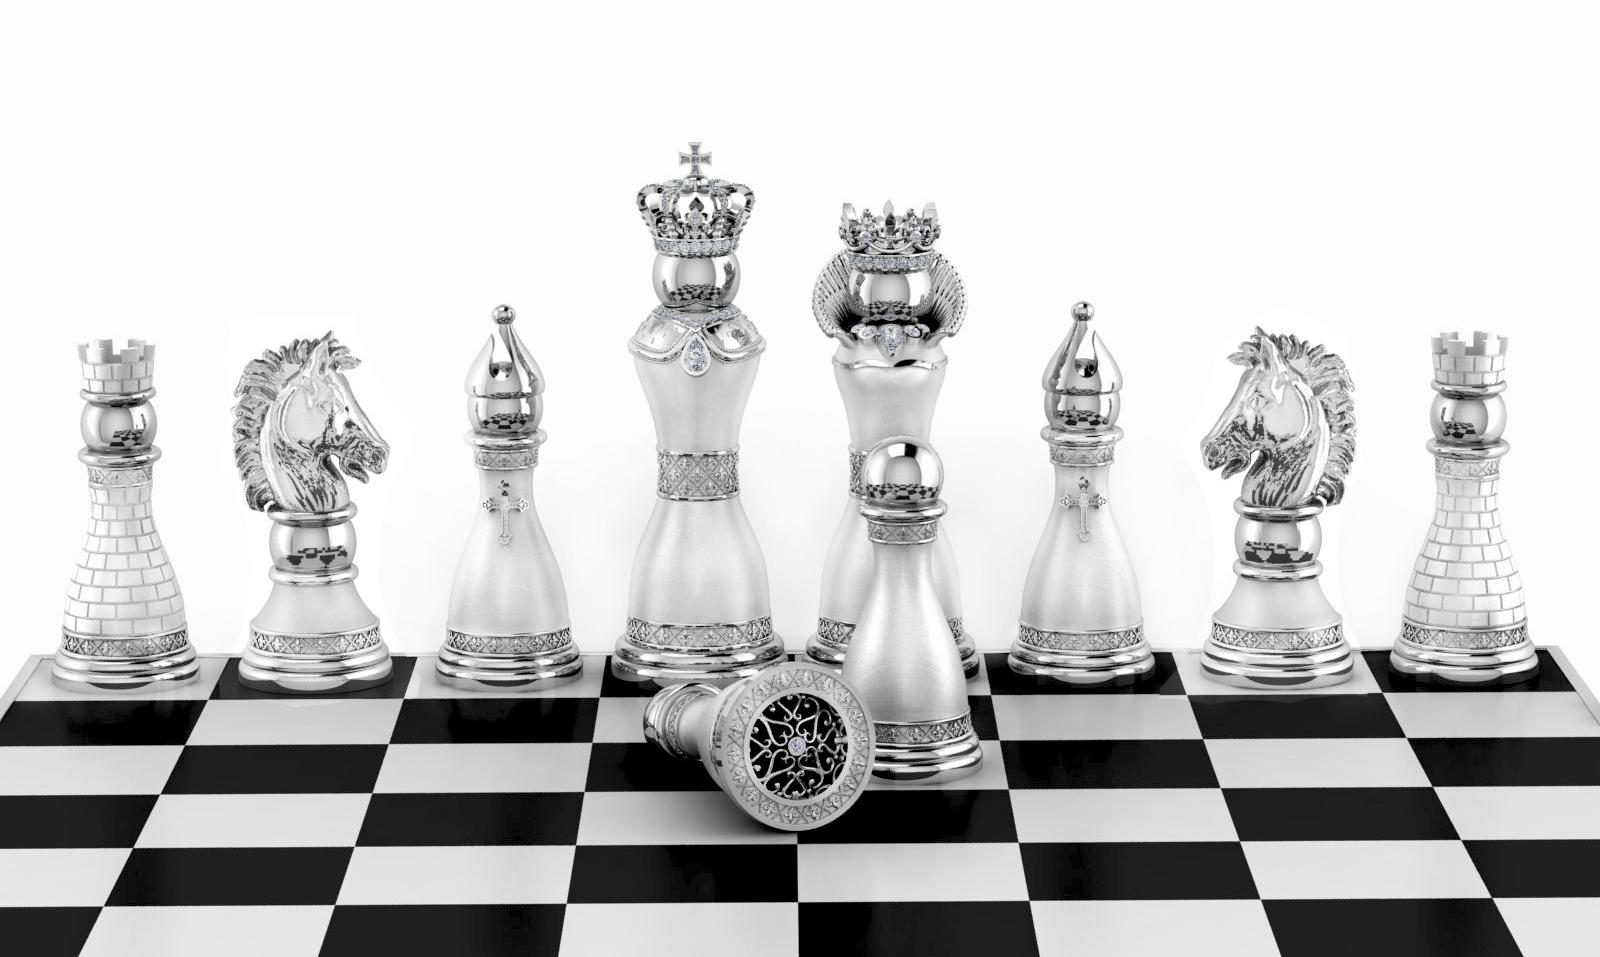 Handcrafted in solid 925 sterling silver, coated in rhodium and set with over 270 of the world's finest diamonds. The Silver Royale Chess Set radiates pure opulence through the finest quality materials design and workmanship. Crafted by renown